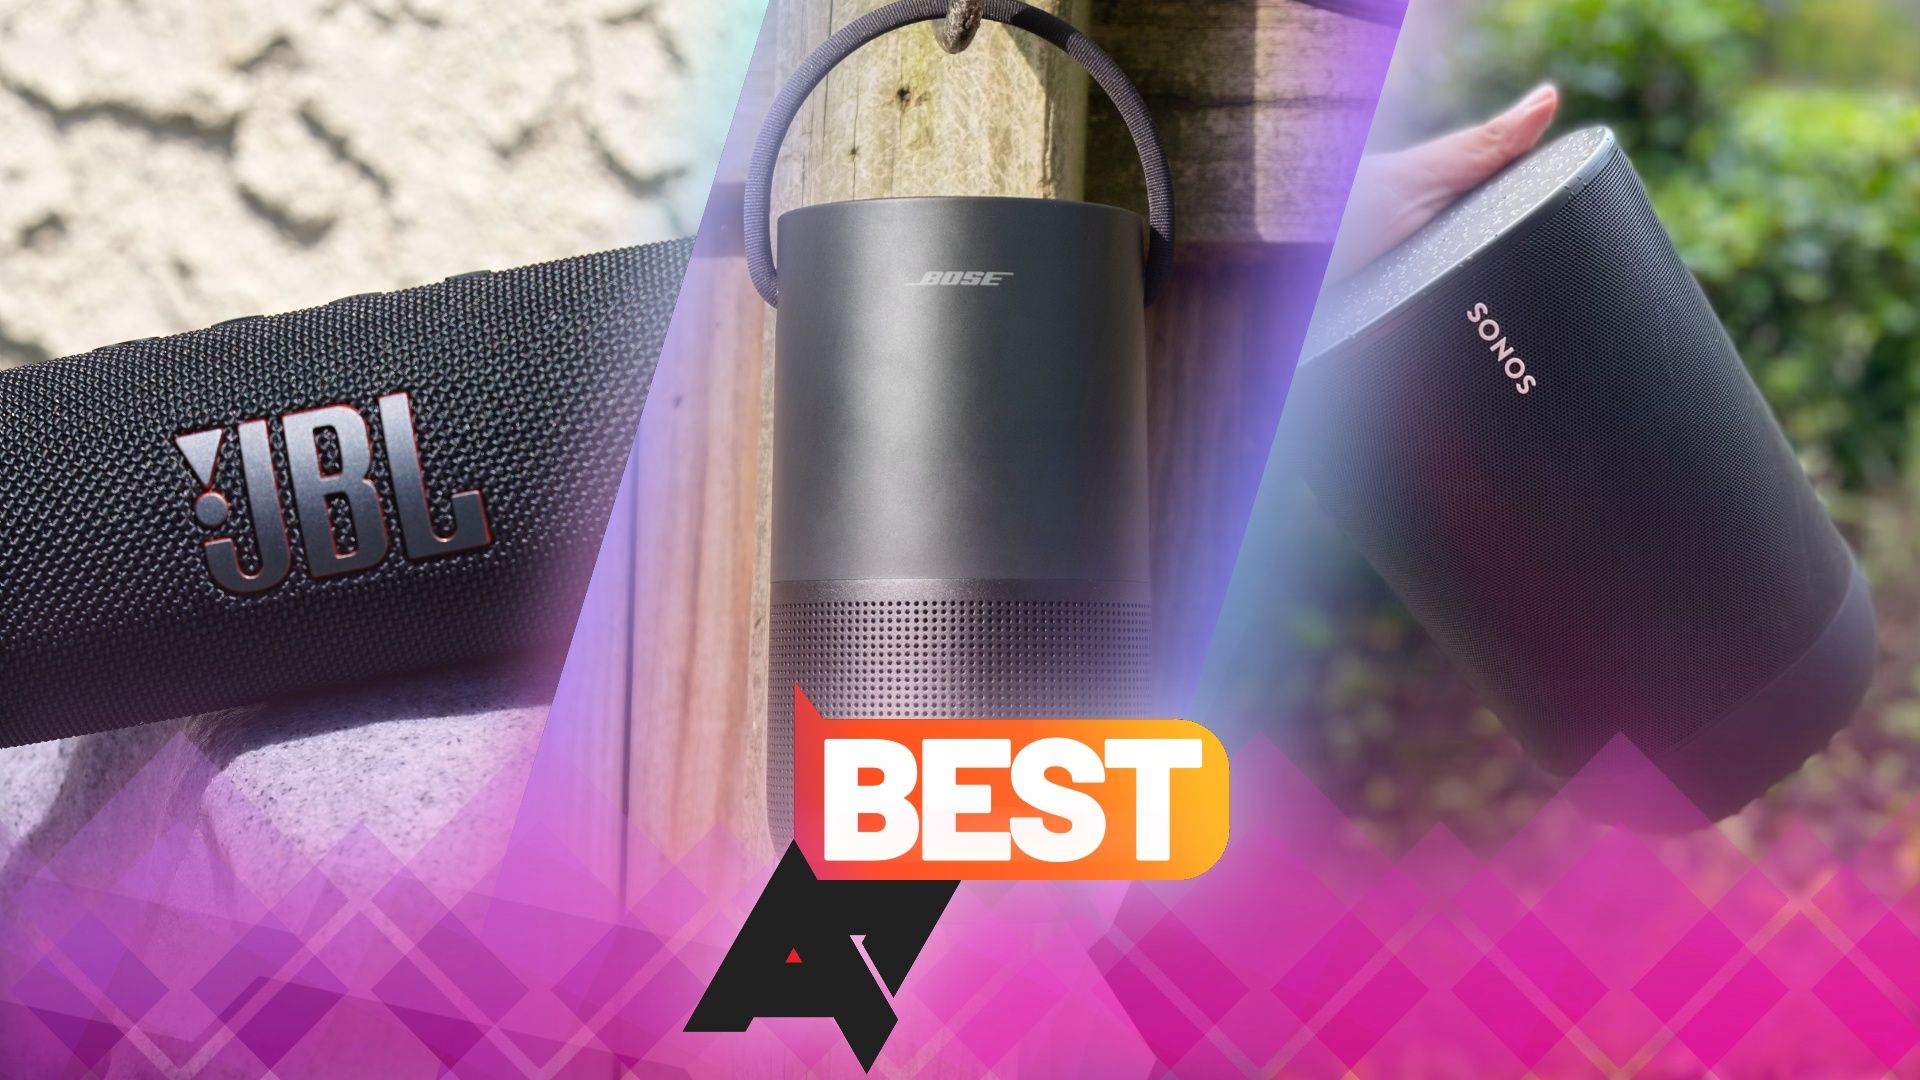 Photos of three portable speakers from JBL, Bose, and Sonos, with an AP Best logo in front